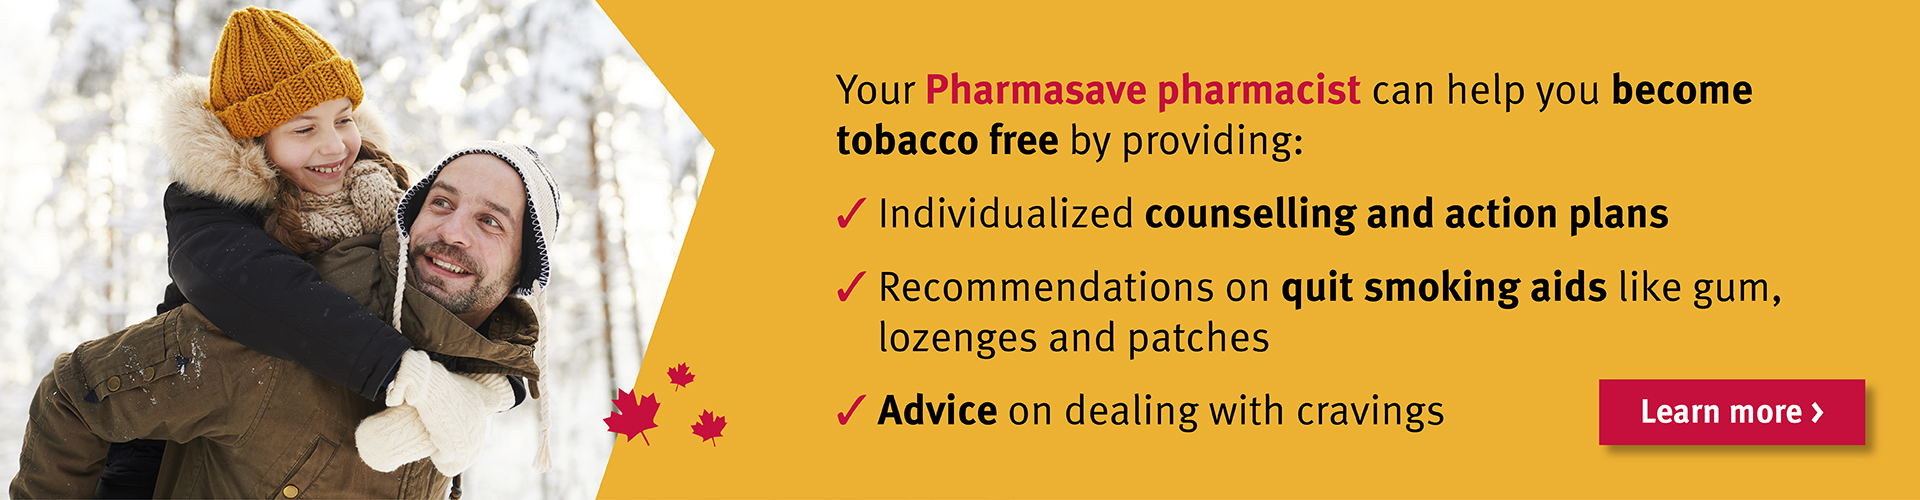 Make this the year you become tobacco free. Speak with your Pharmasave pharmacist.